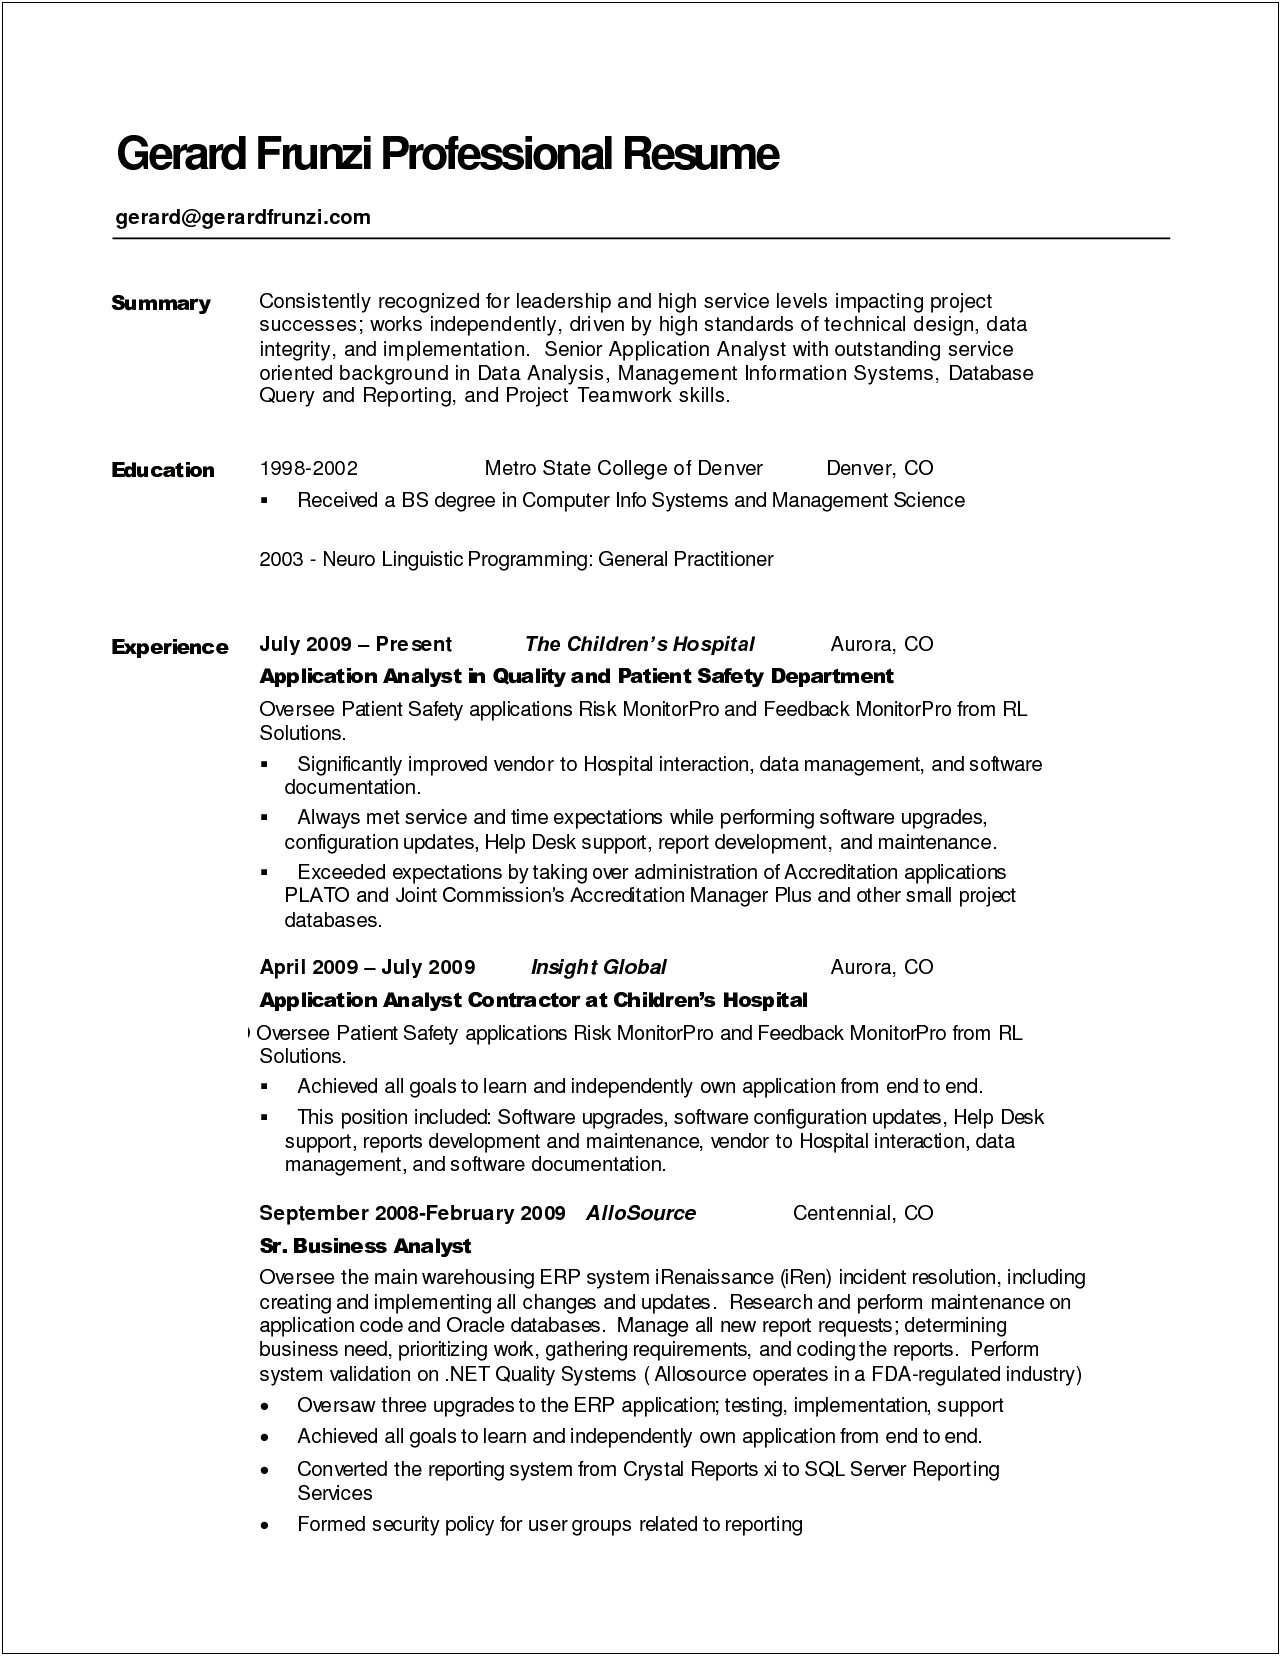 Resume Summary About Being Great With People